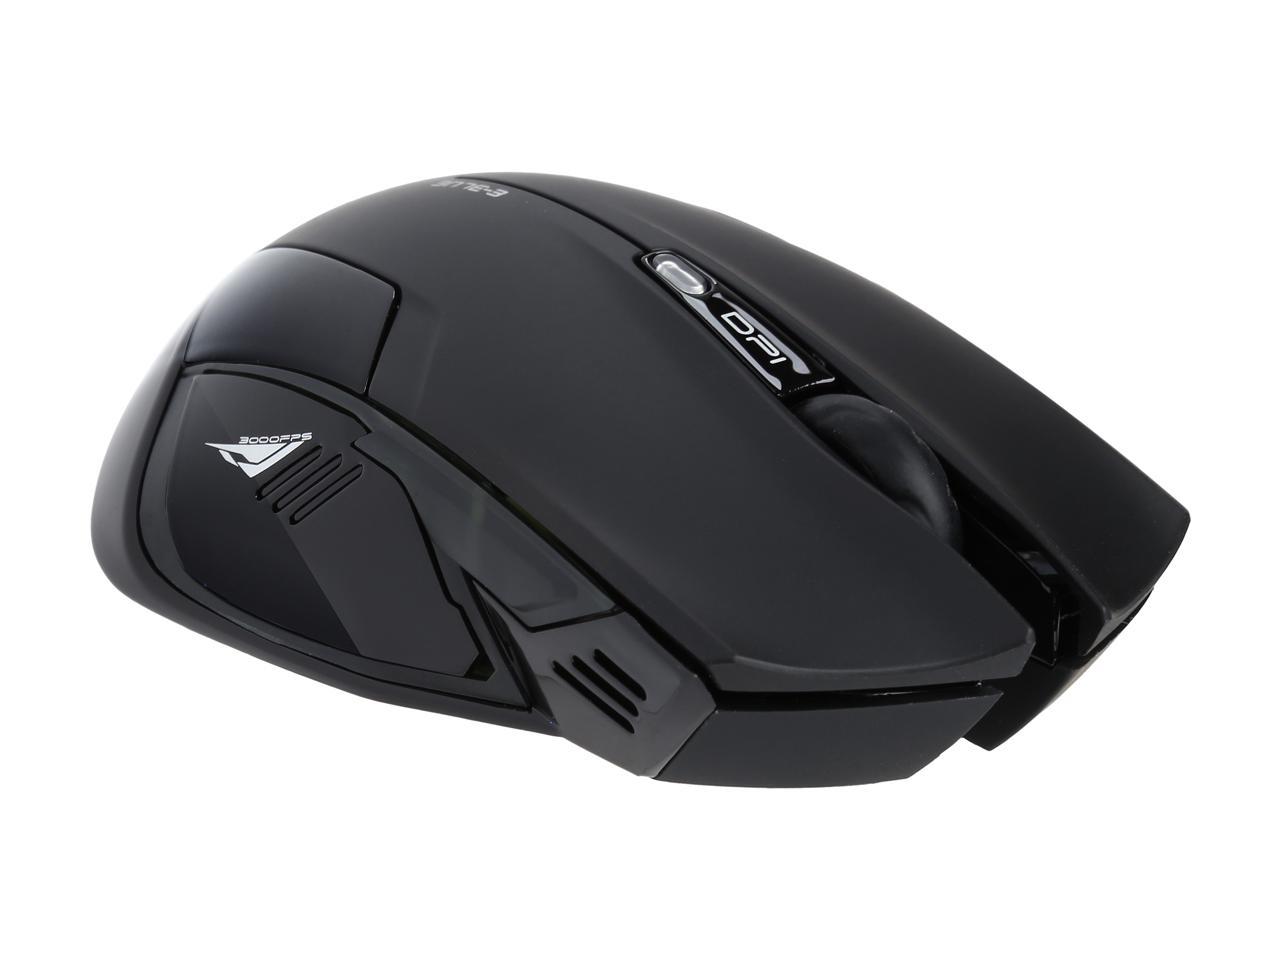 e-3lue 2500 dpi optical led wireless gaming mouse for pc and mac, black (ems152bk) mouse driver